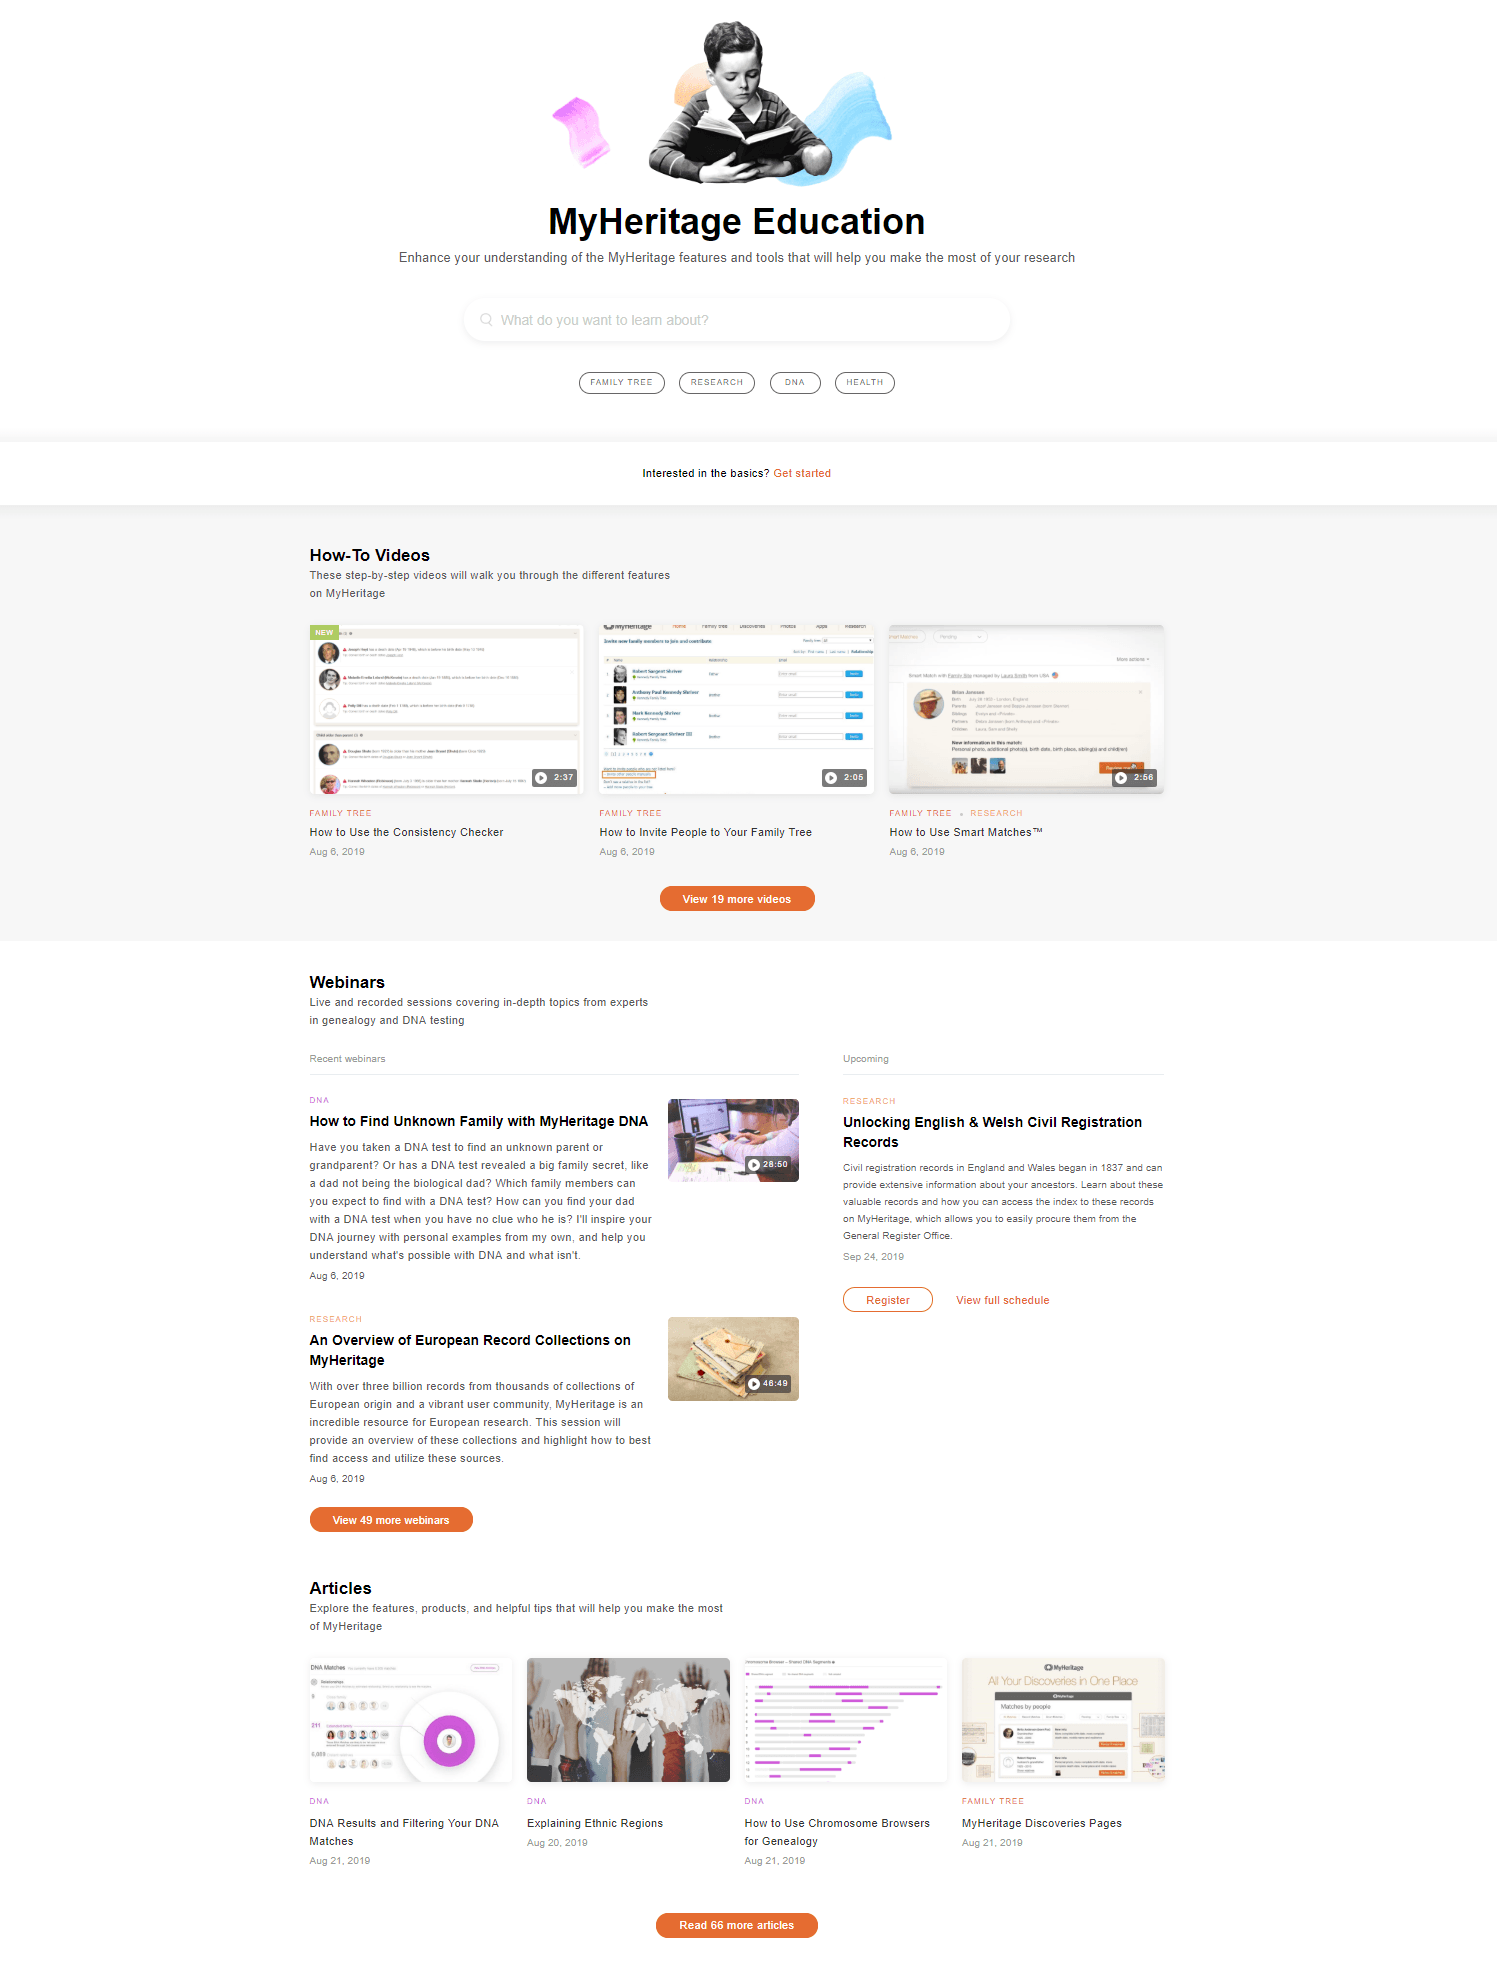 The new MyHeritage Education homepage (click to zoom) 